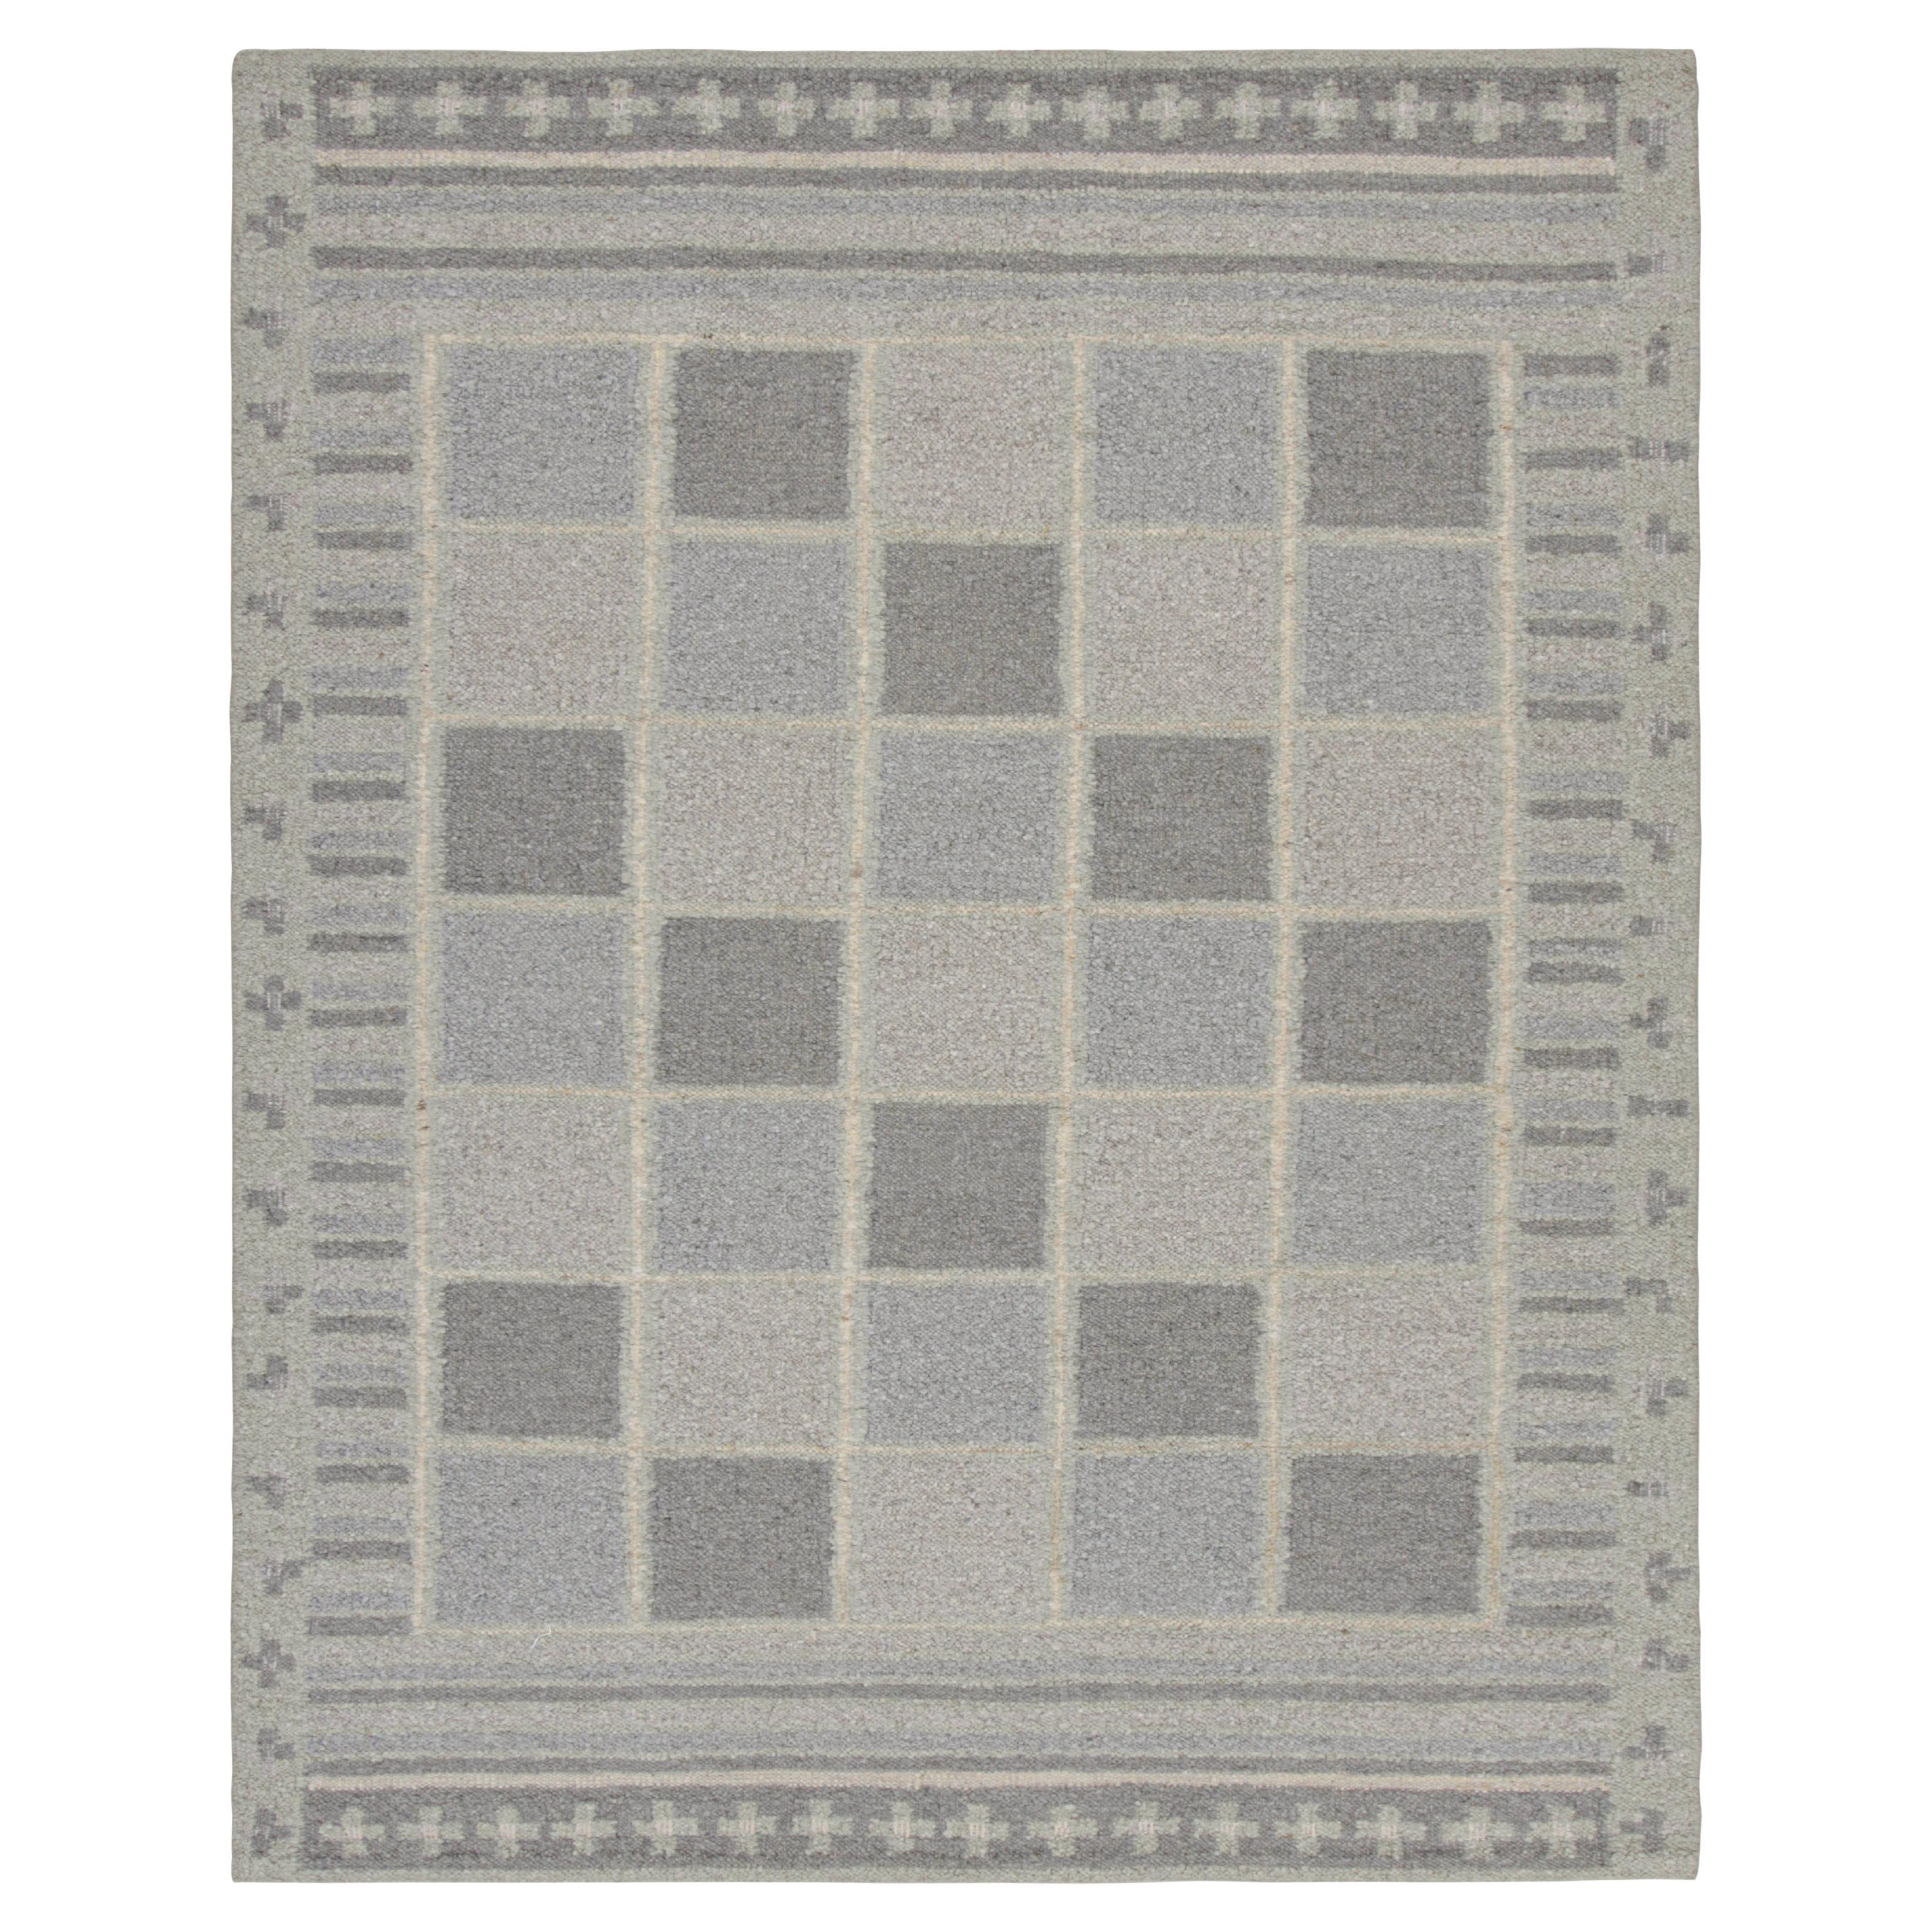 Rug & Kilim’s Scandinavian Style Rug with Gray and Blue Geometric Patterns